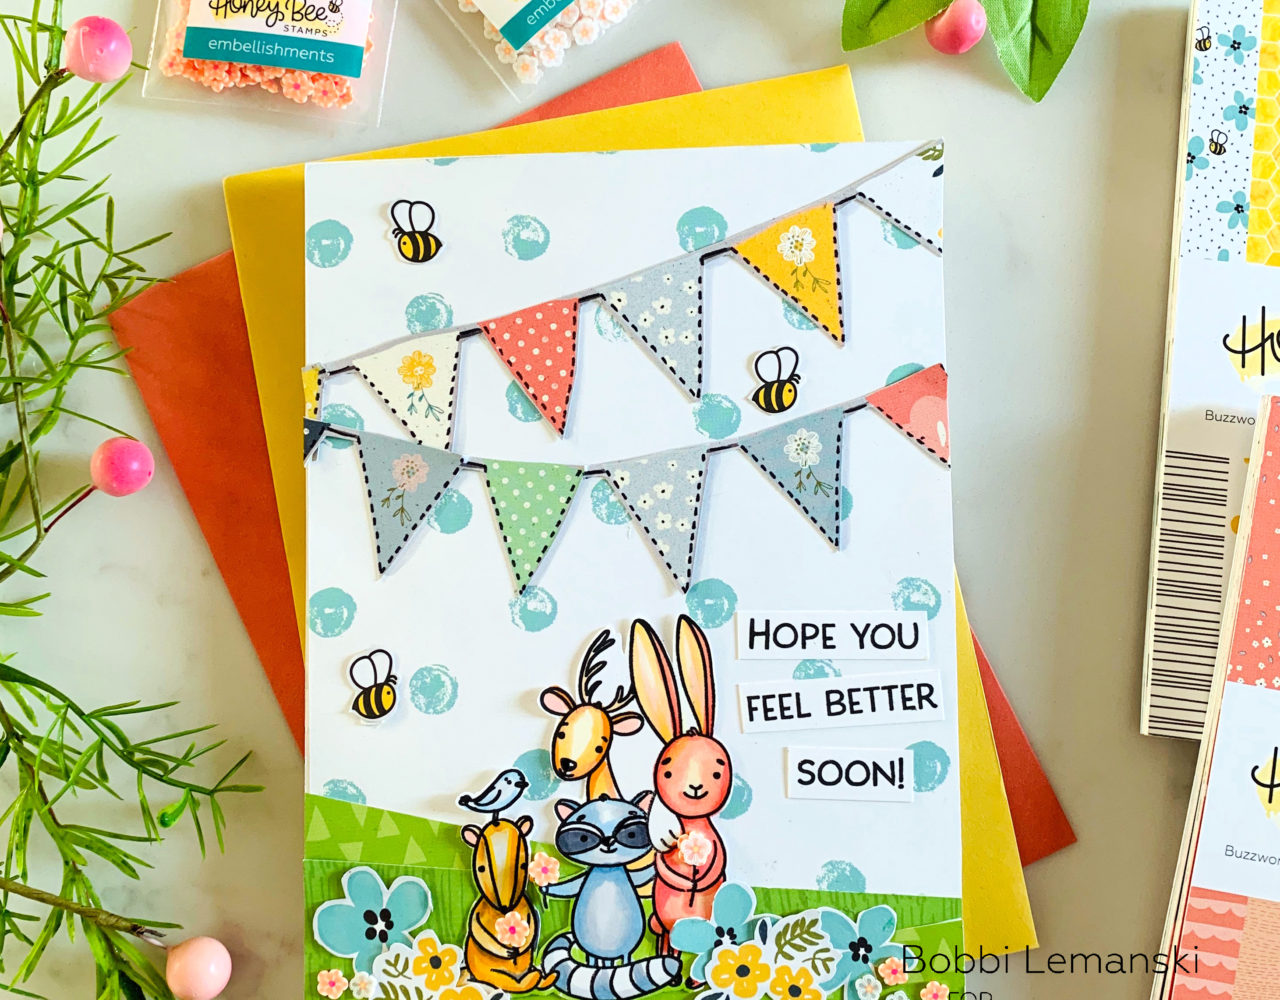 Create and Save with Patterned Papers!